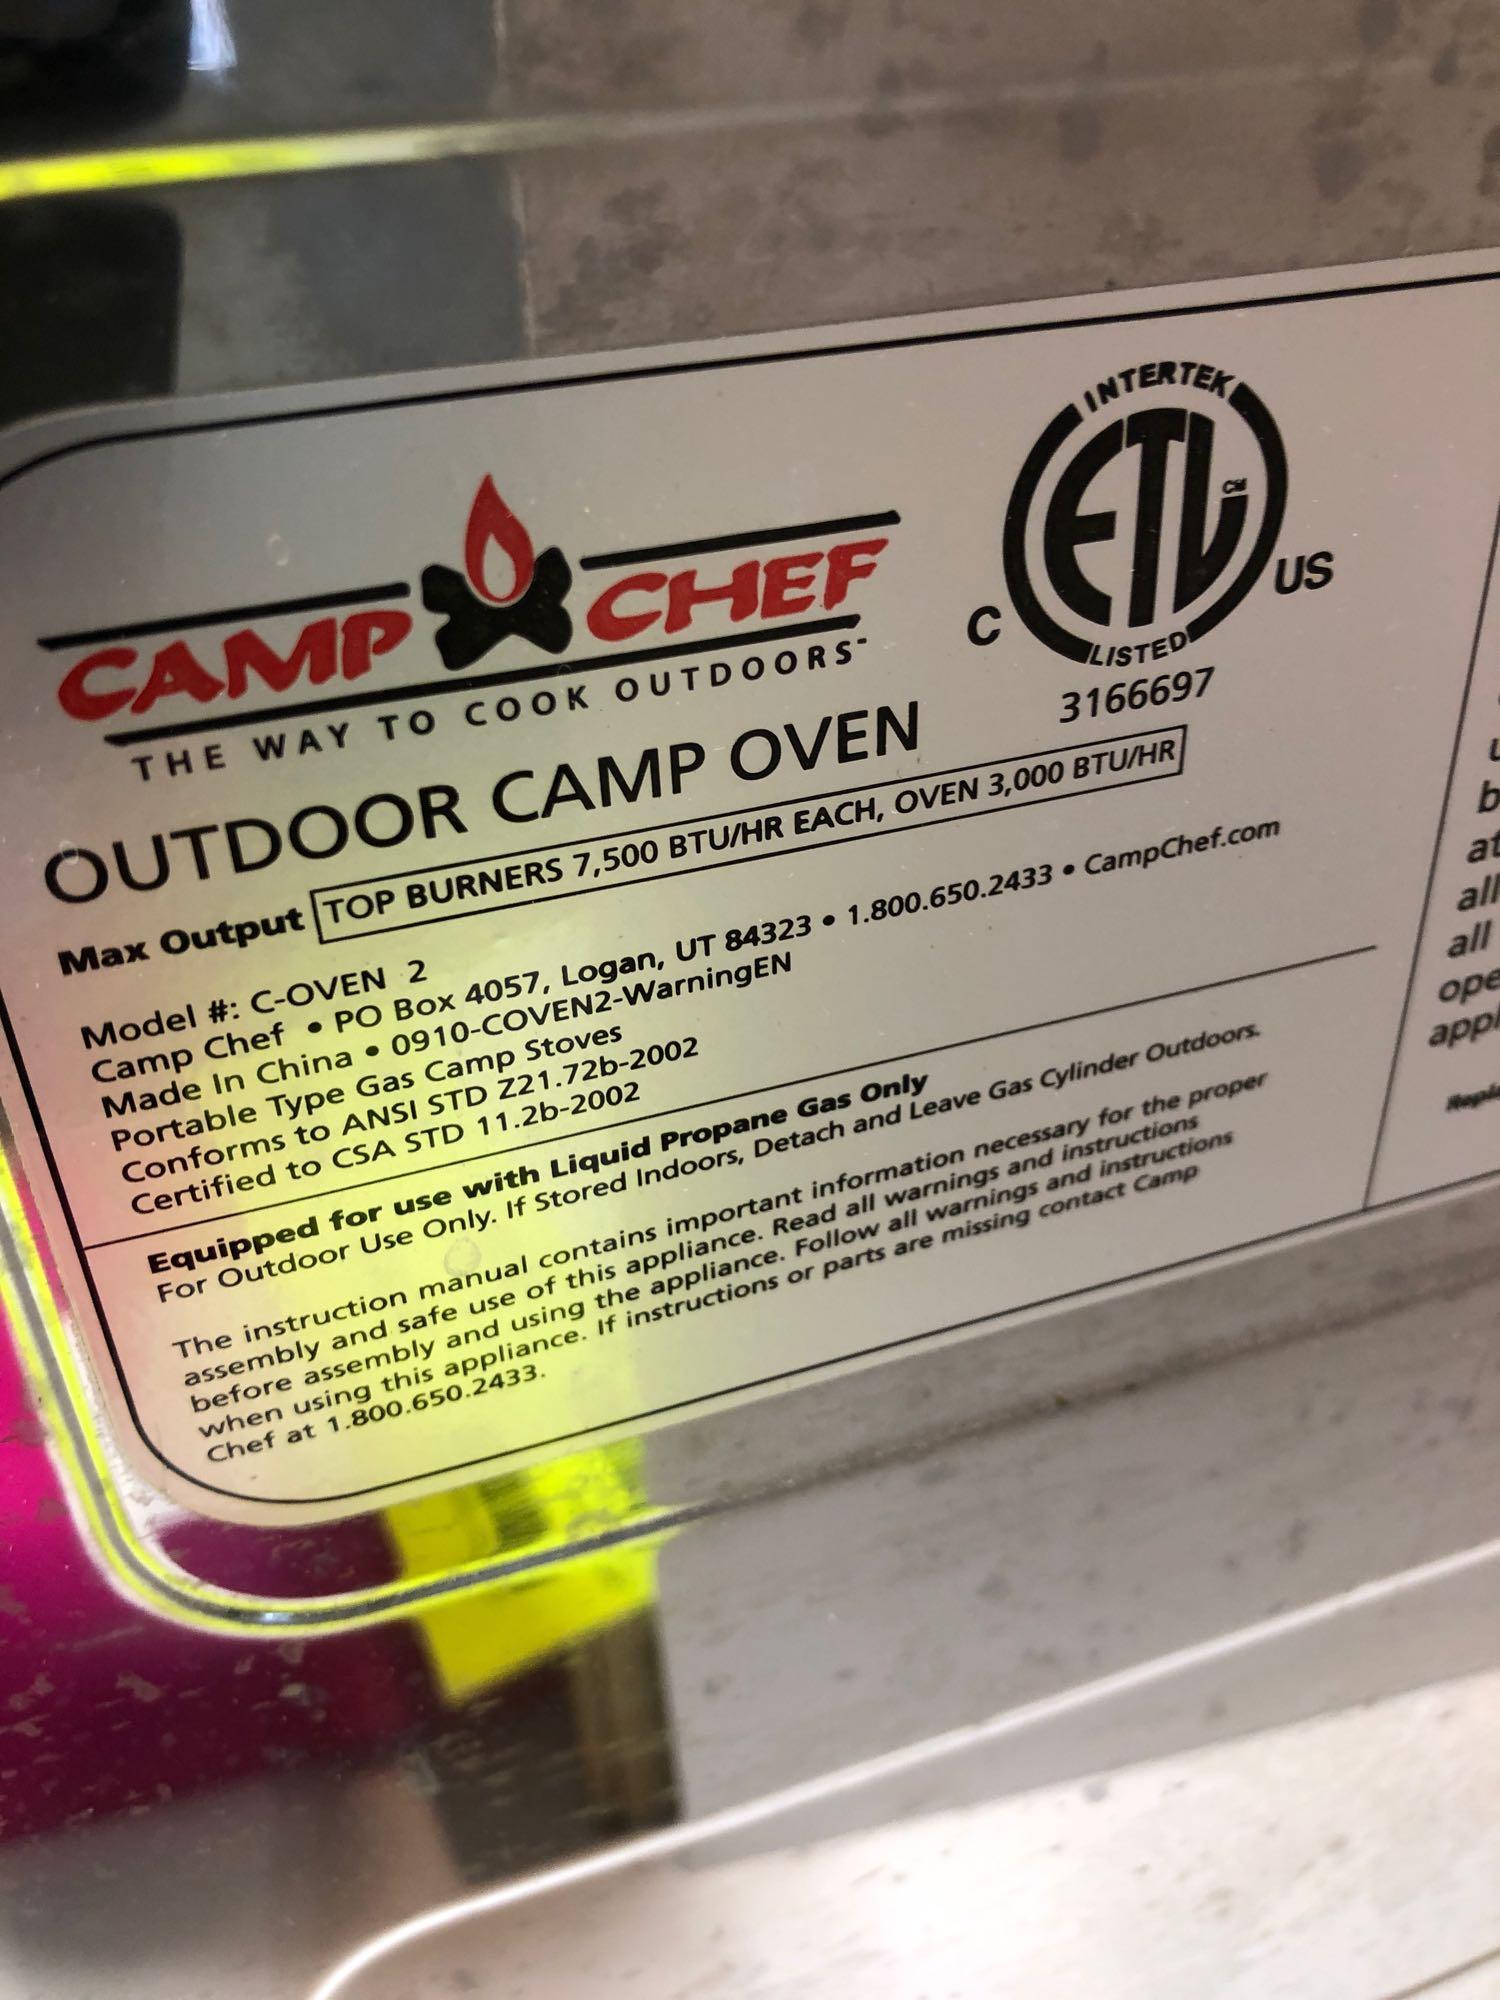 CAMP CHEF(model C-OVEN 2)outdoor camp oven